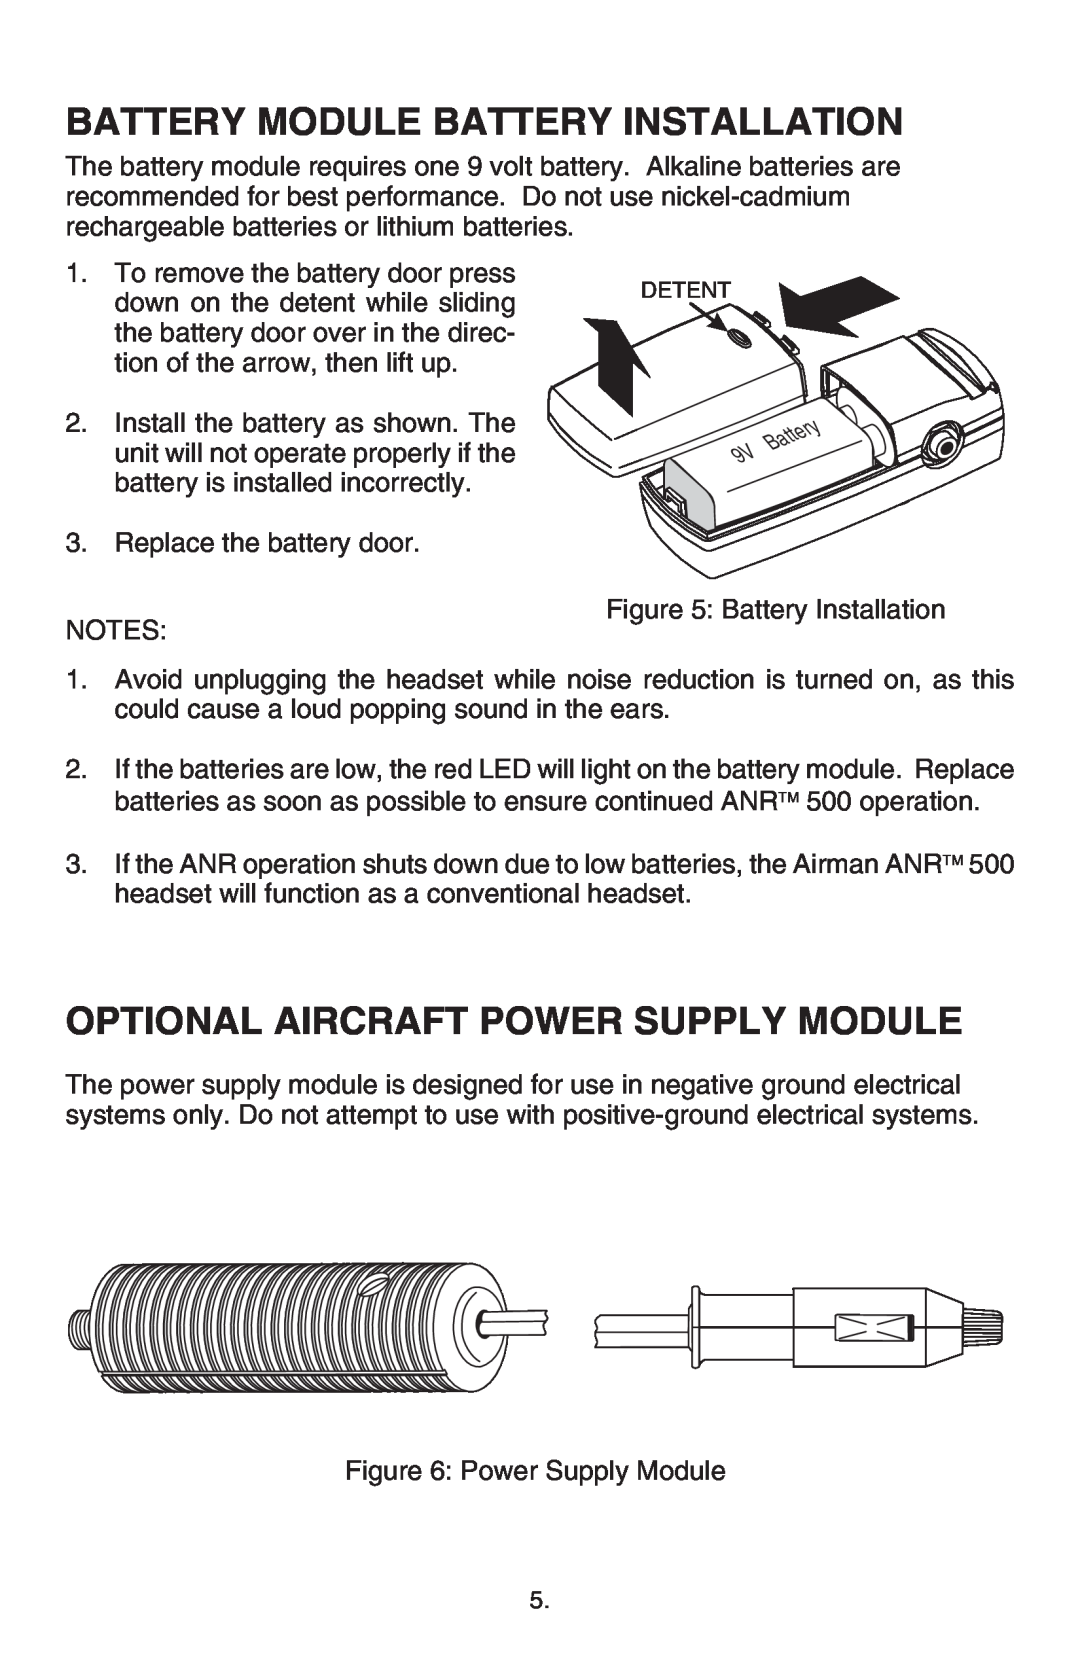 Telex ANR TM 500 operating instructions Battery Module Battery Installation, Optional Aircraft Power Supply Module 